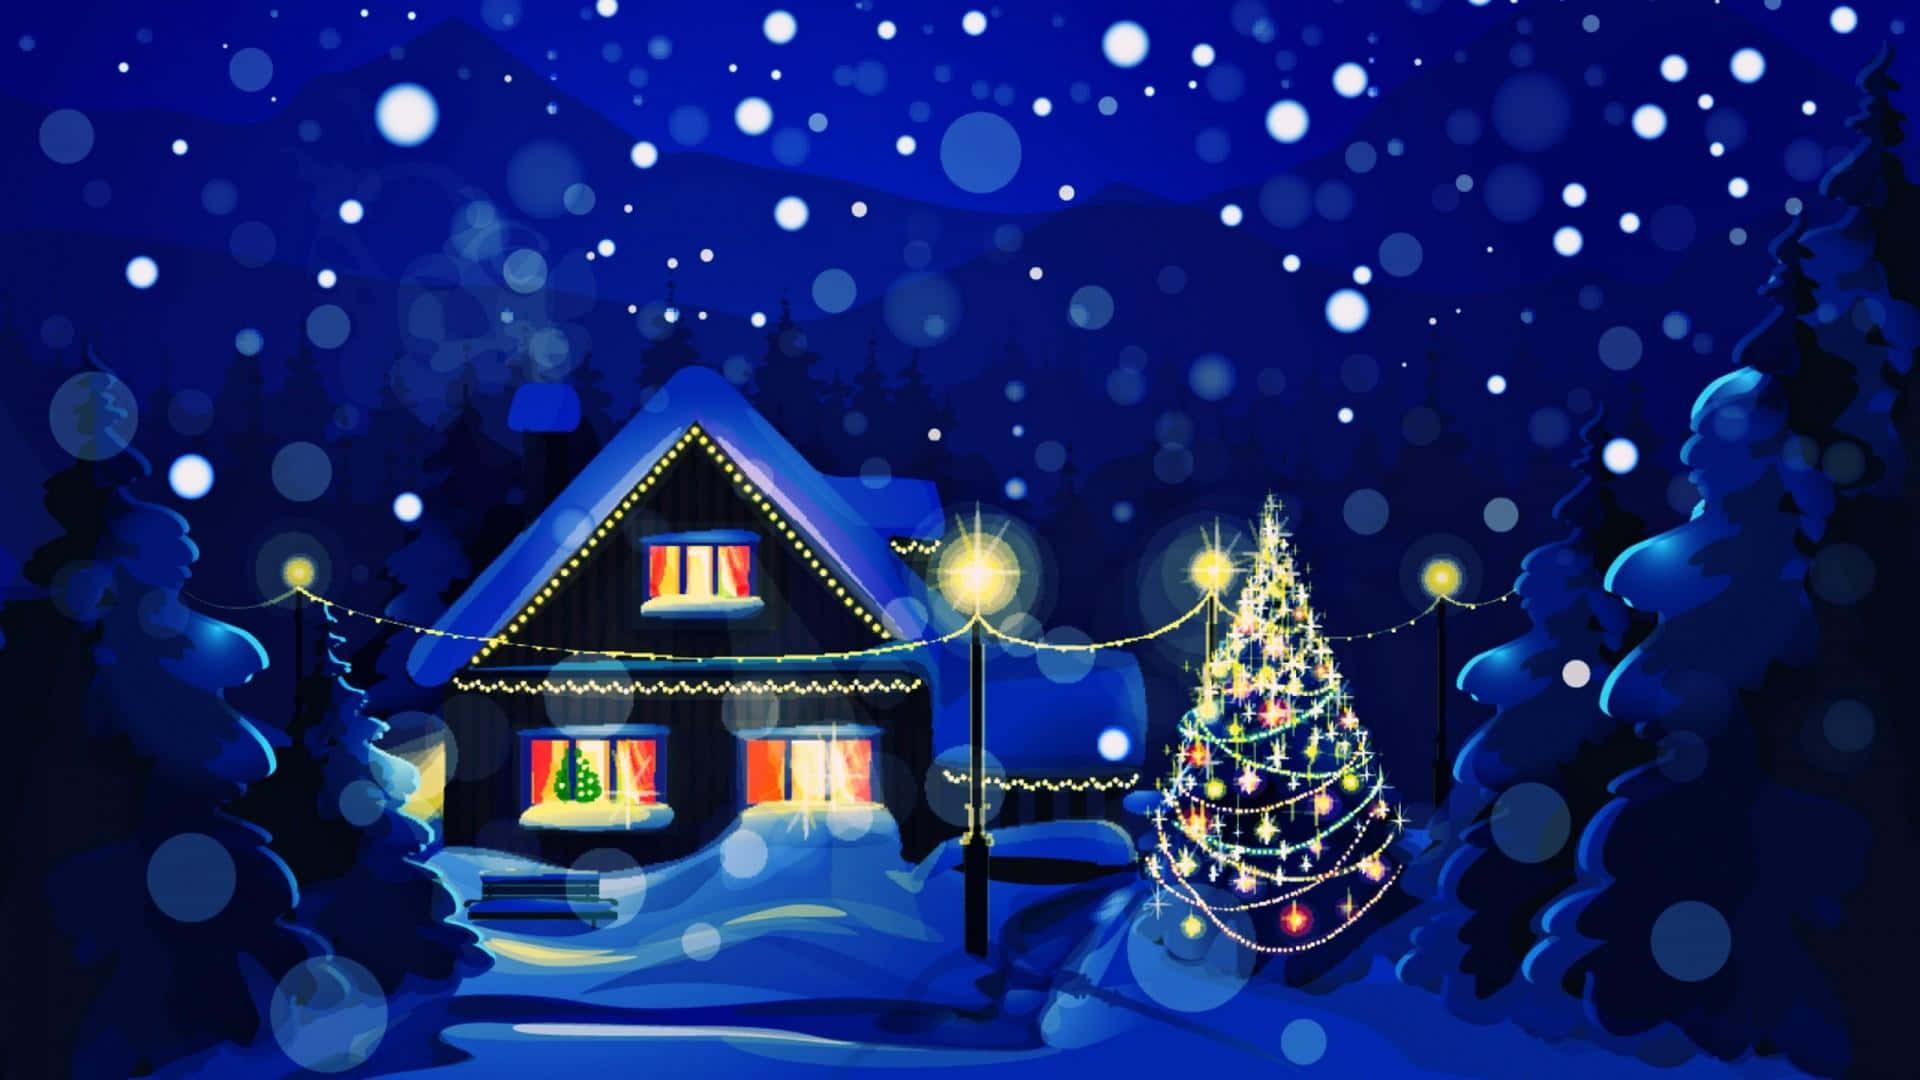 Get lost in the magical Christmas village Wallpaper